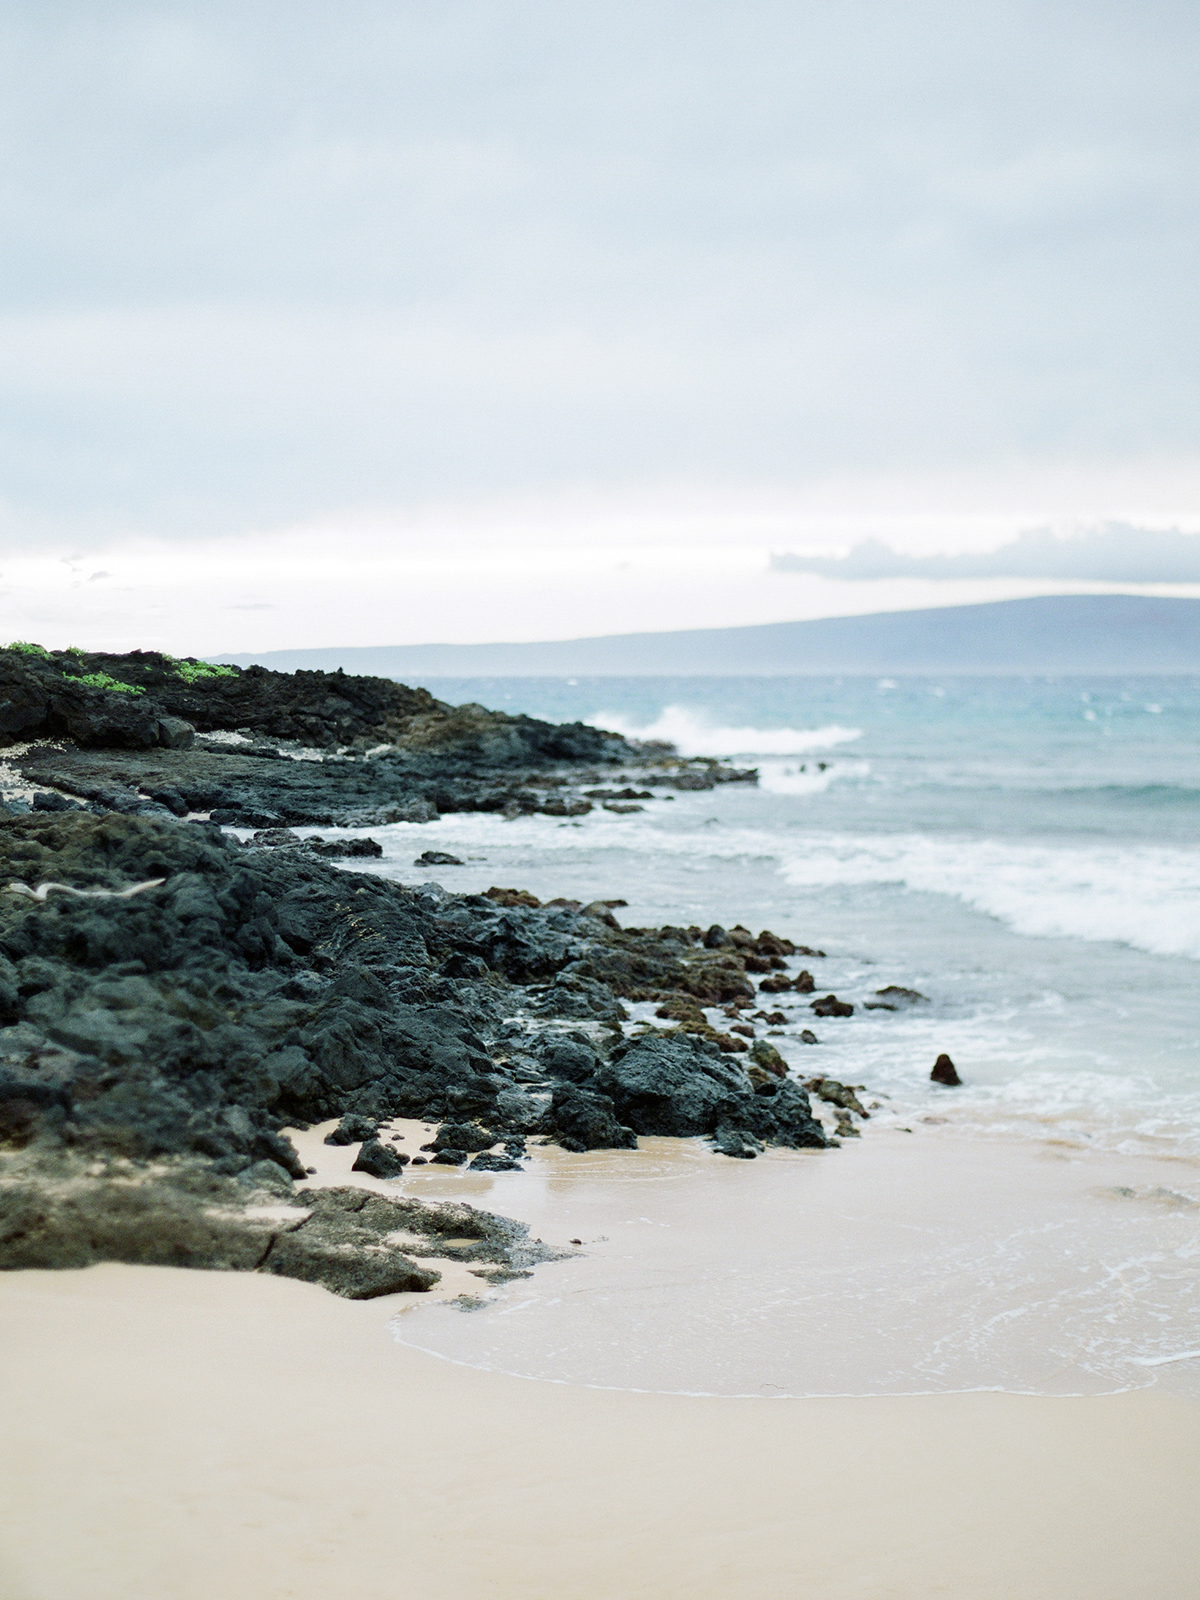 Planning your trip to Maui!